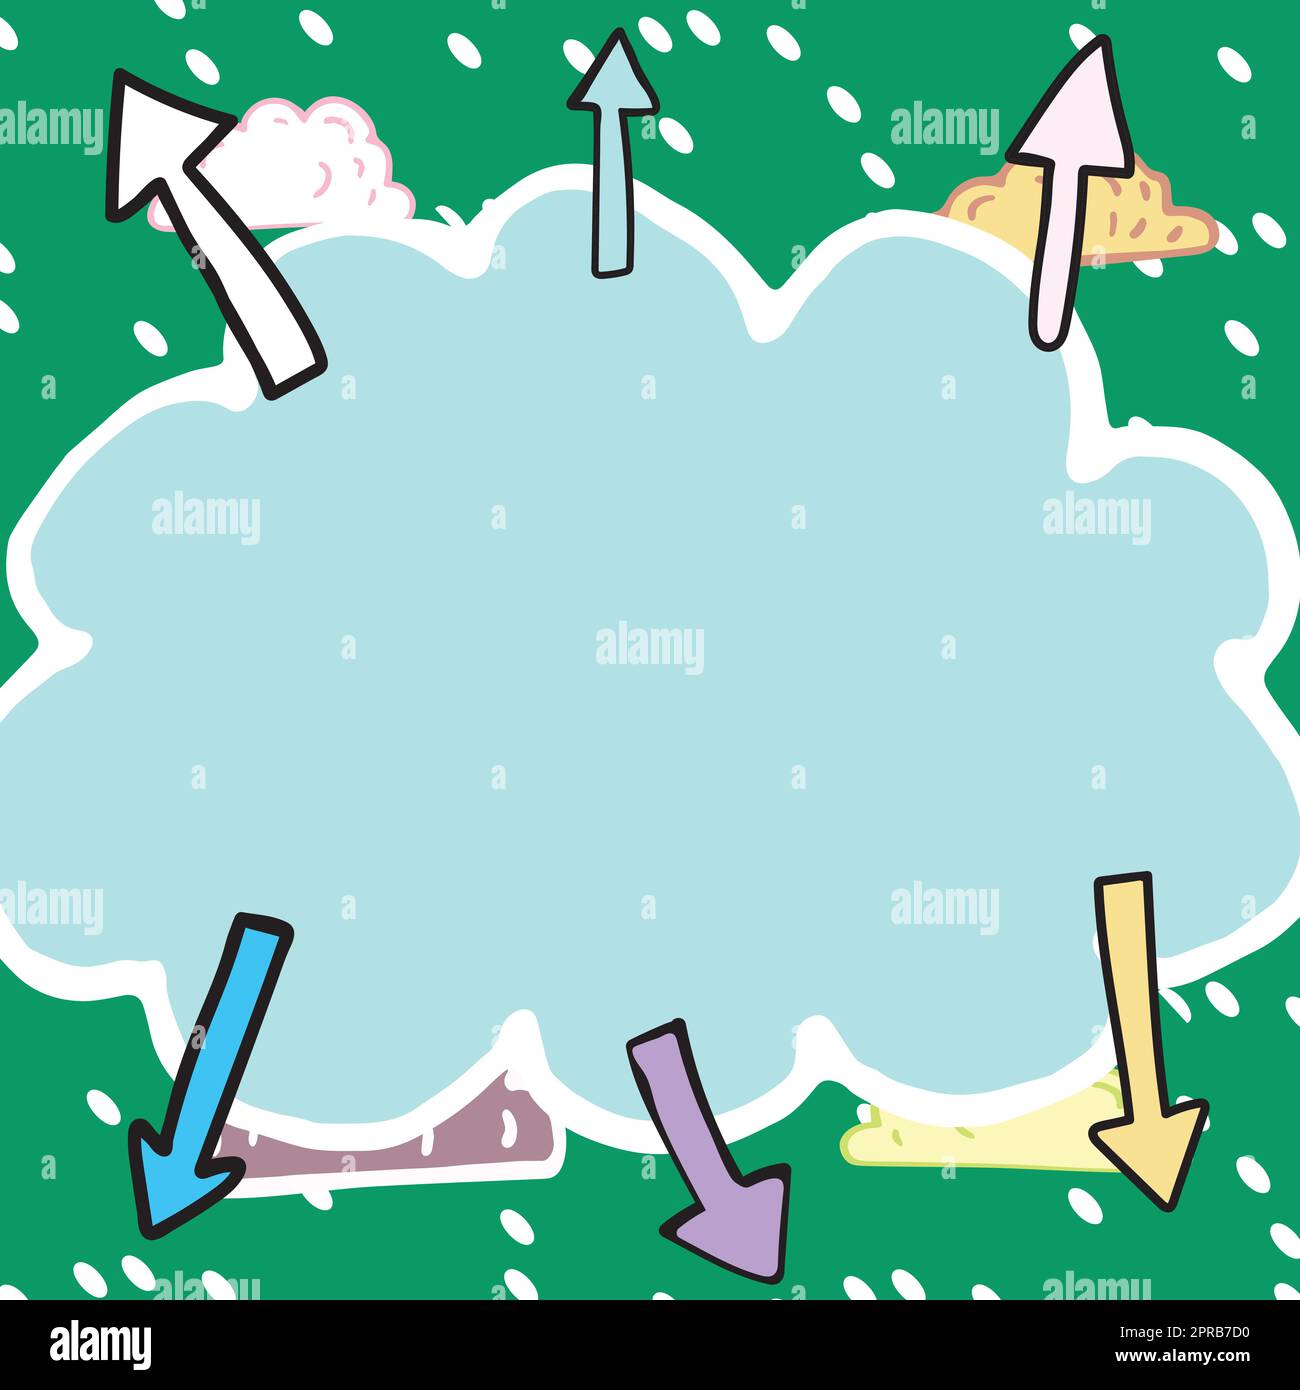 Important Messages Written In Shape Of Cloud With Arrows Around. Crutial Informations Presented In Cloudy Form With Snow In Background. Recent Ideas Diplayed. Stock Vector